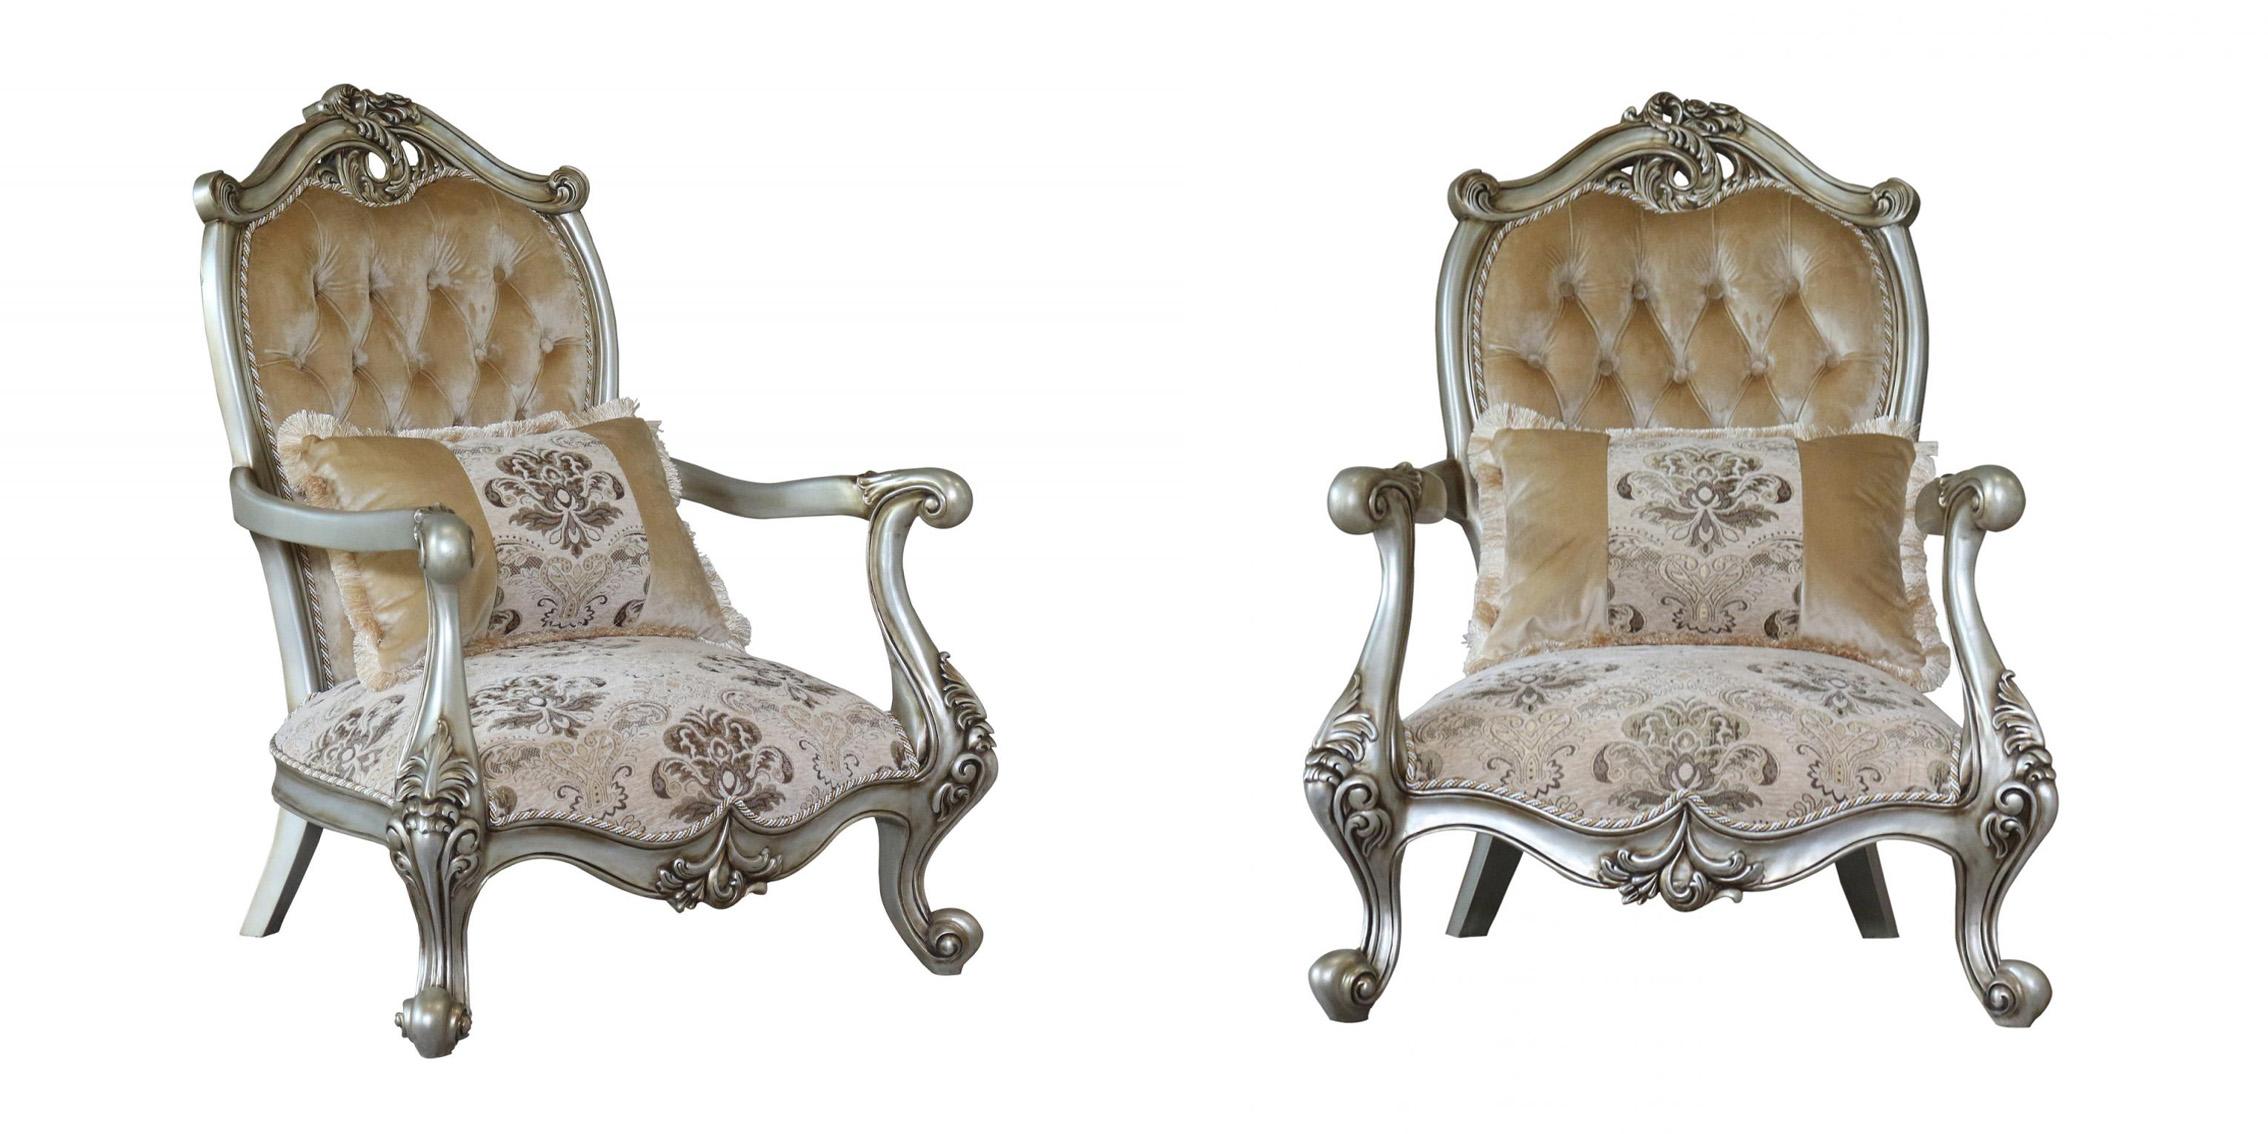 Classic, Traditional Arm Chair Set VALERIA 38066-C-Set-2 in Antique, Silver Fabric